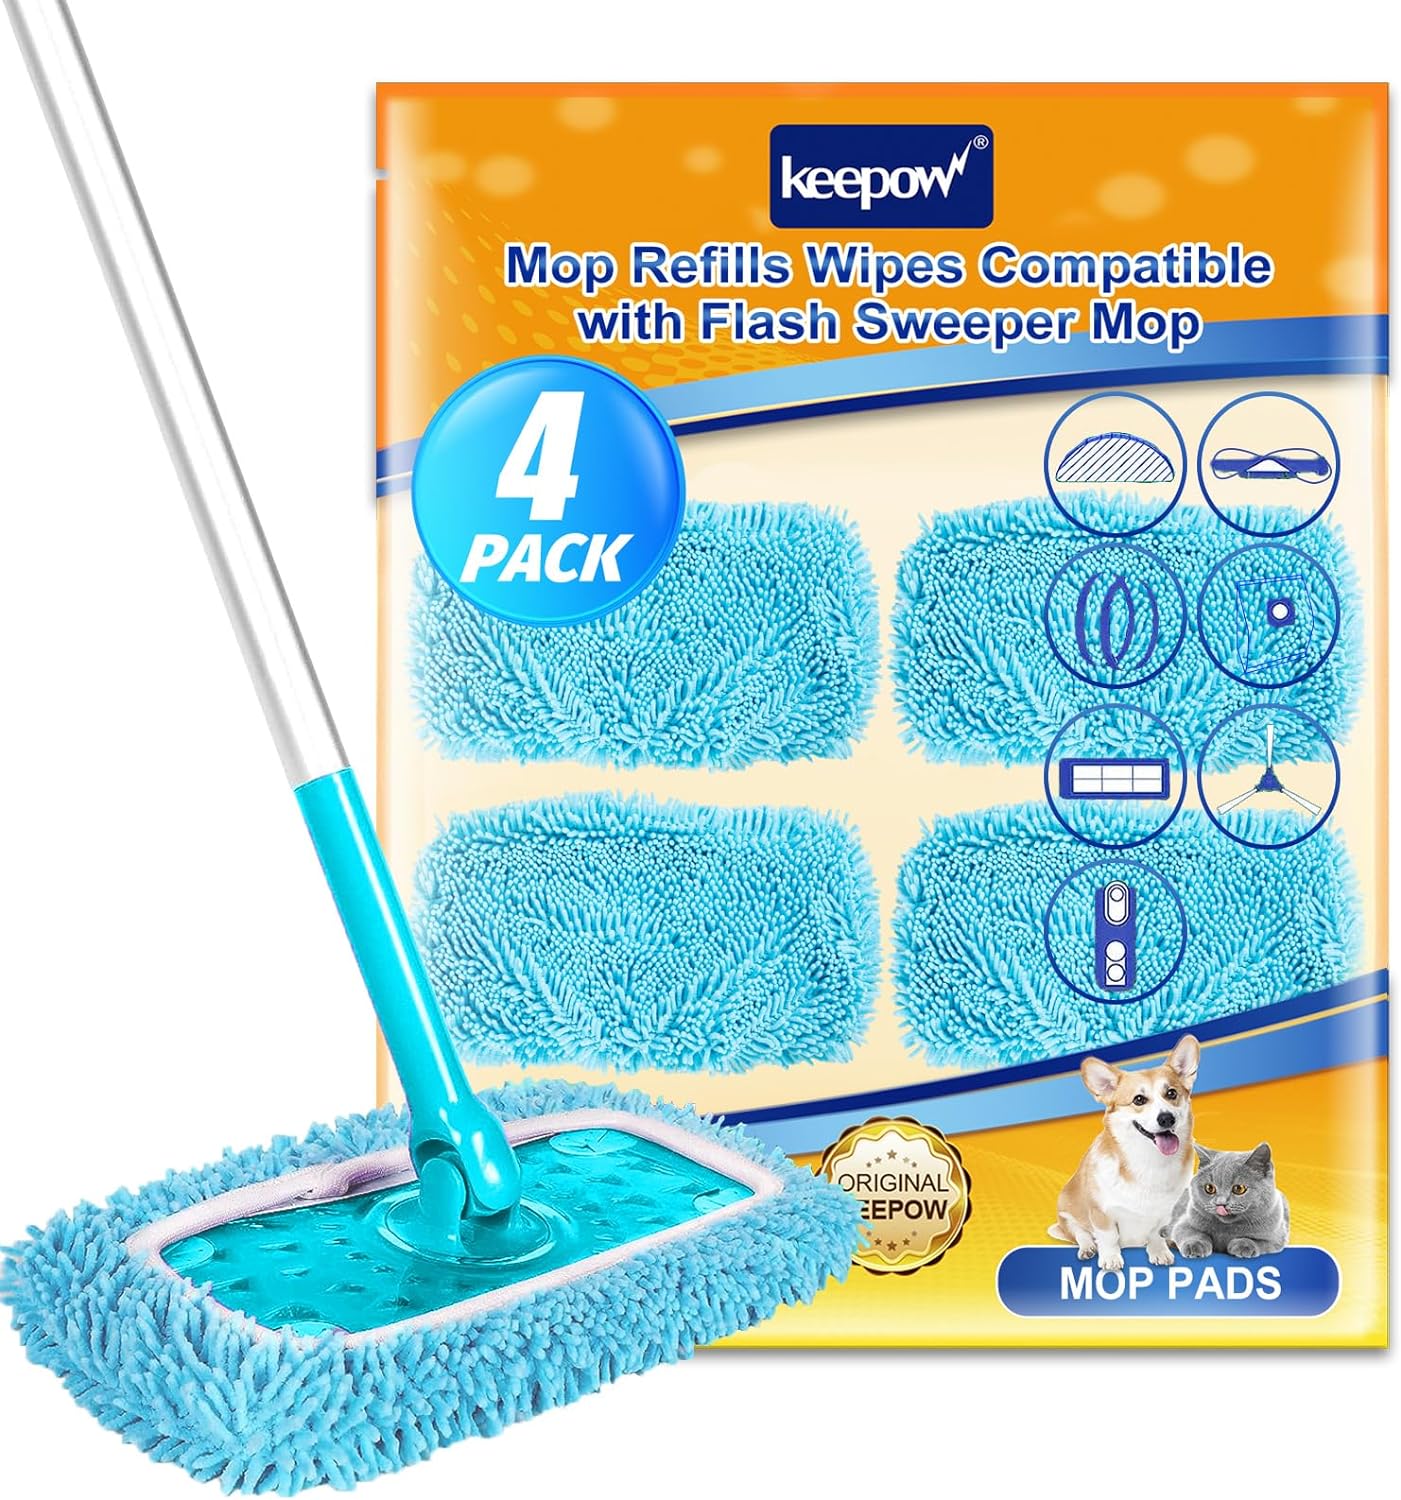 KEEPOW 5701M Reusable Mop Pads for 10-12 Inches Flat Mop, Microfiber Dry Pads for Flash Speed Mop(4 Pack)